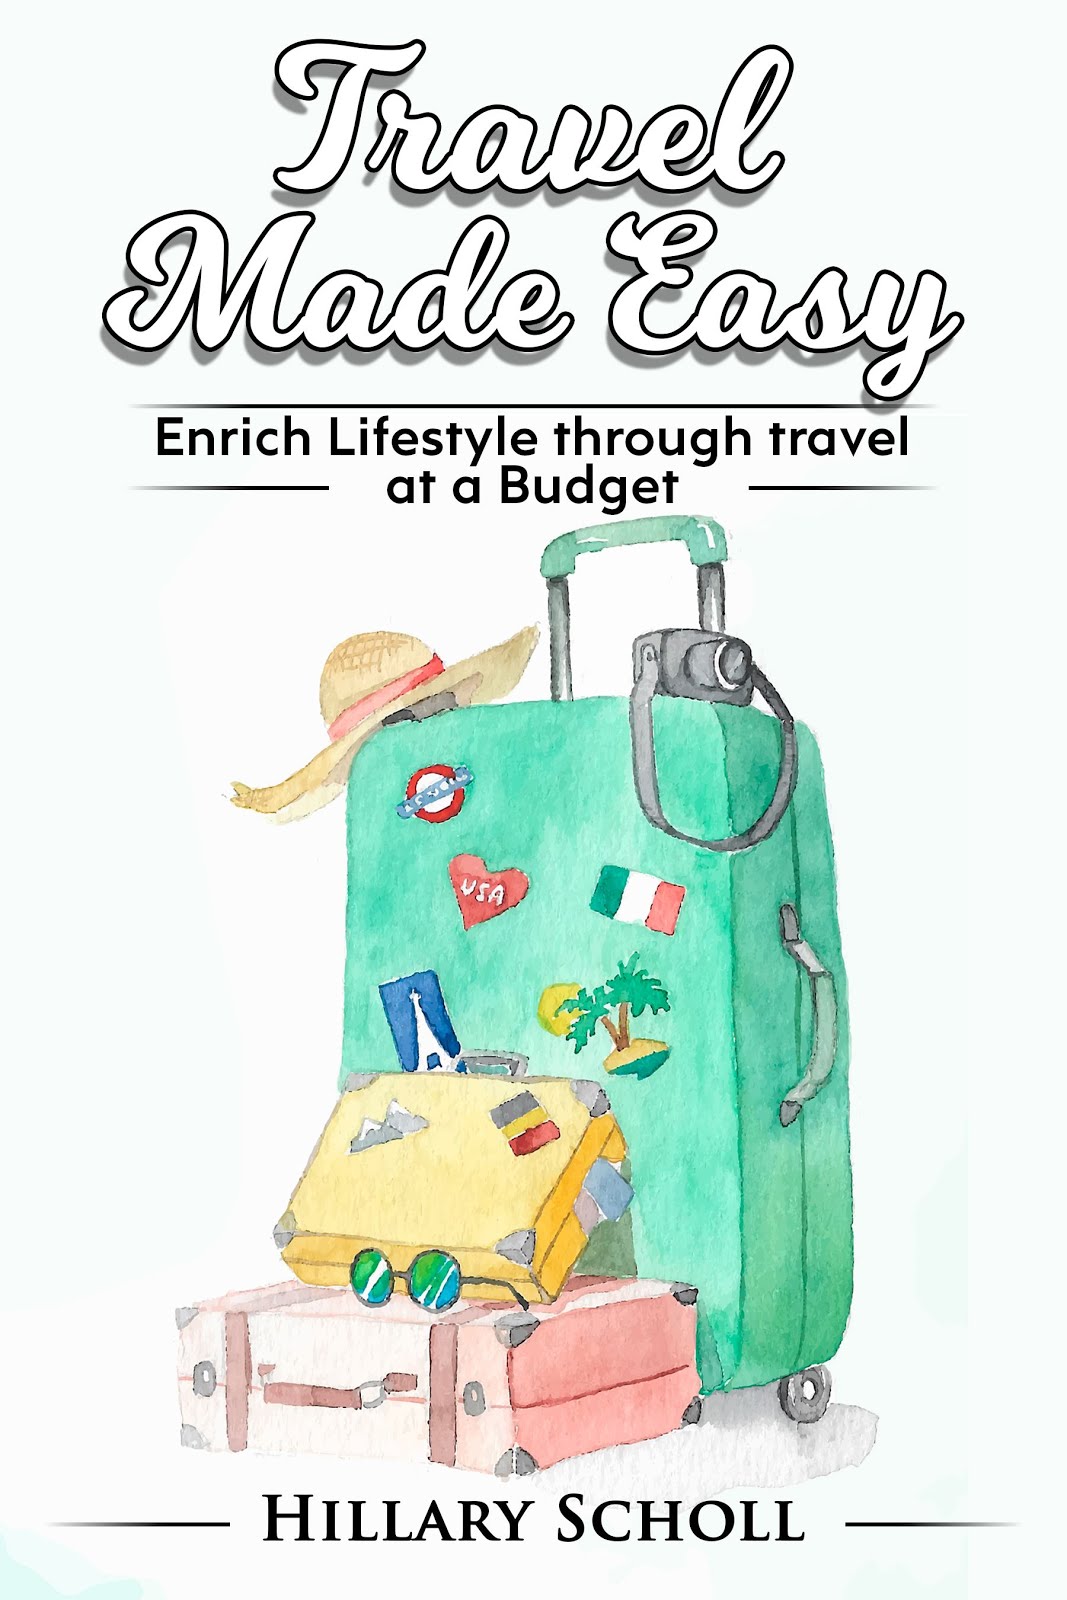 Travel Made Easy